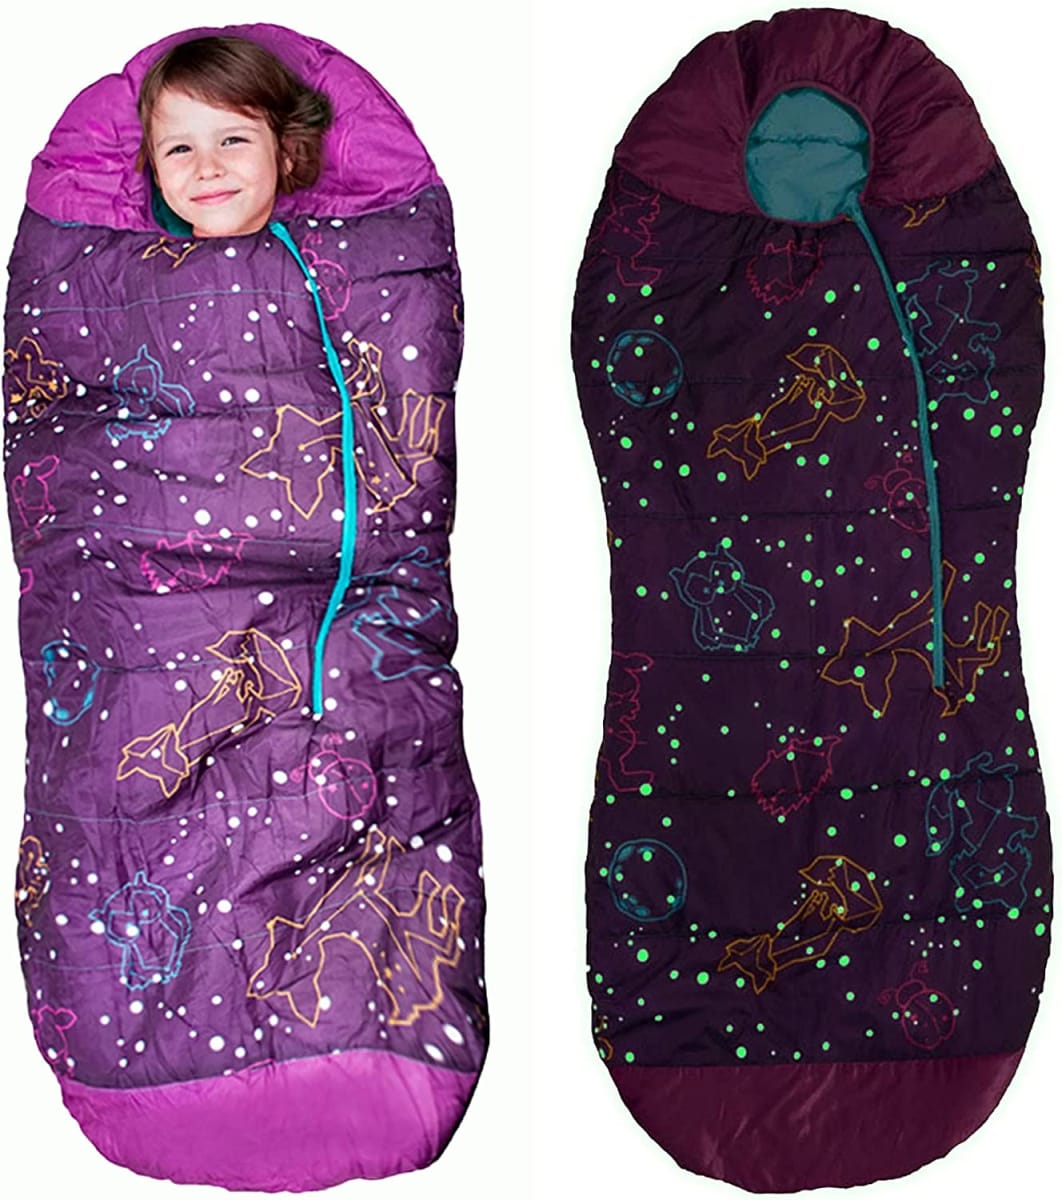 Glow in The Dark Mummy Sleeping Bag for Kids and Youth, Temperature Rating 30°F/-1°C, Water-Resistant for Camping, Hiking, and Slumber Party